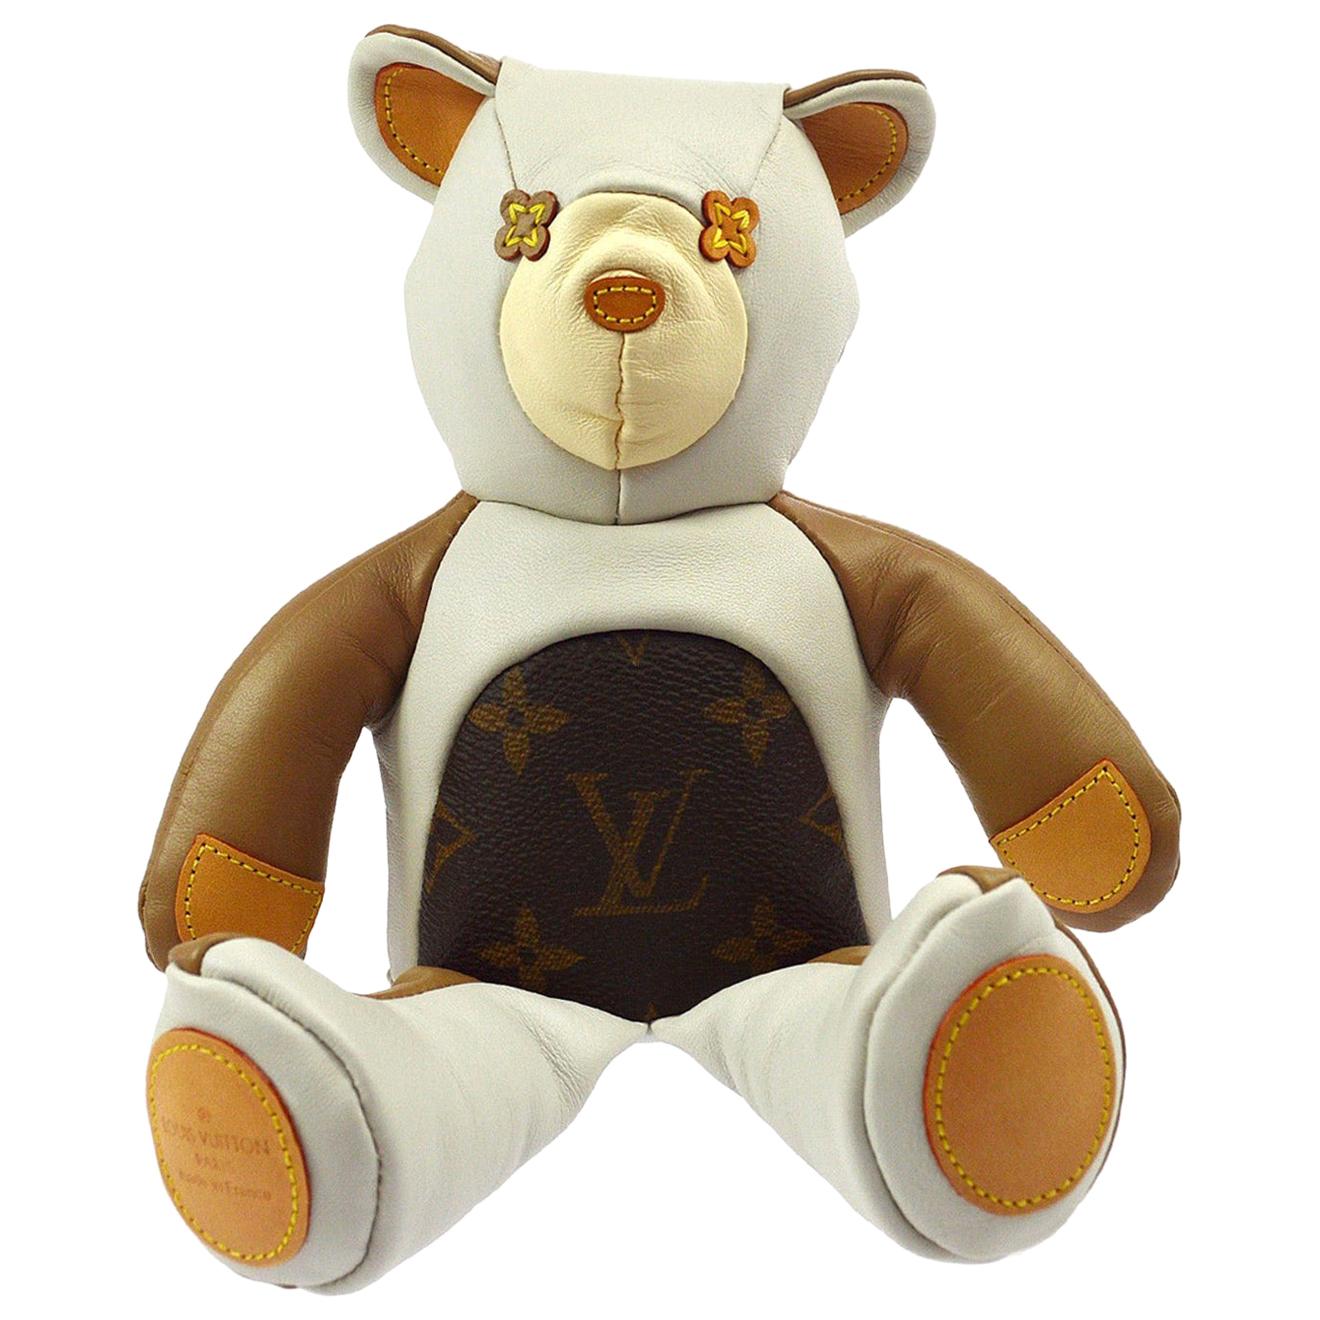 Louis Vuitton NEW Ivory Brown Monogram Canvas Leather Toy Novelty Teddy Bear